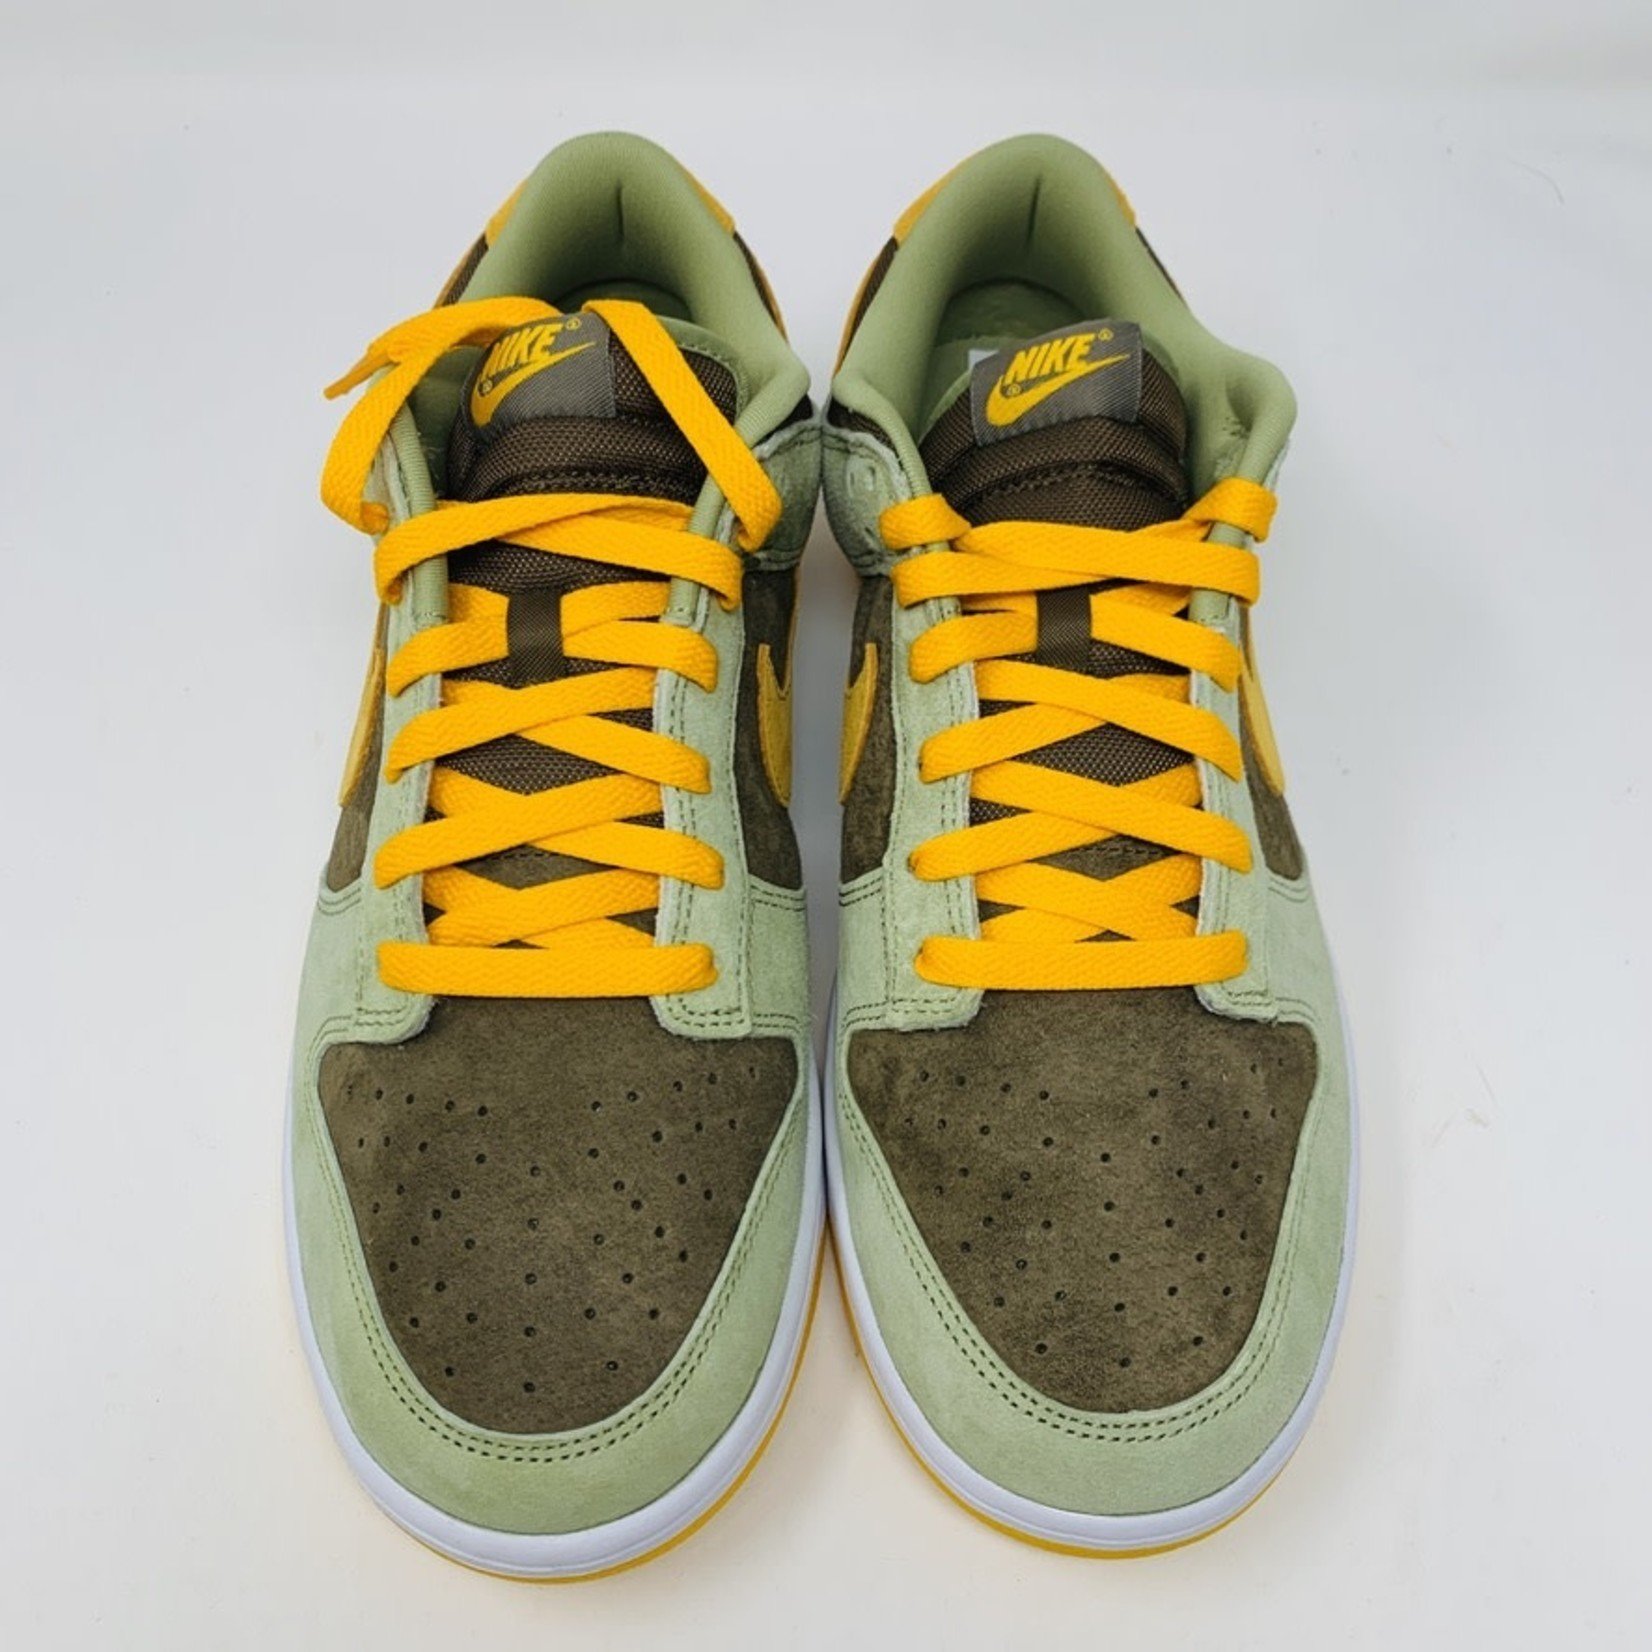 Nike Dunk Low Dusty Olive for Sale, Authenticity Guaranteed